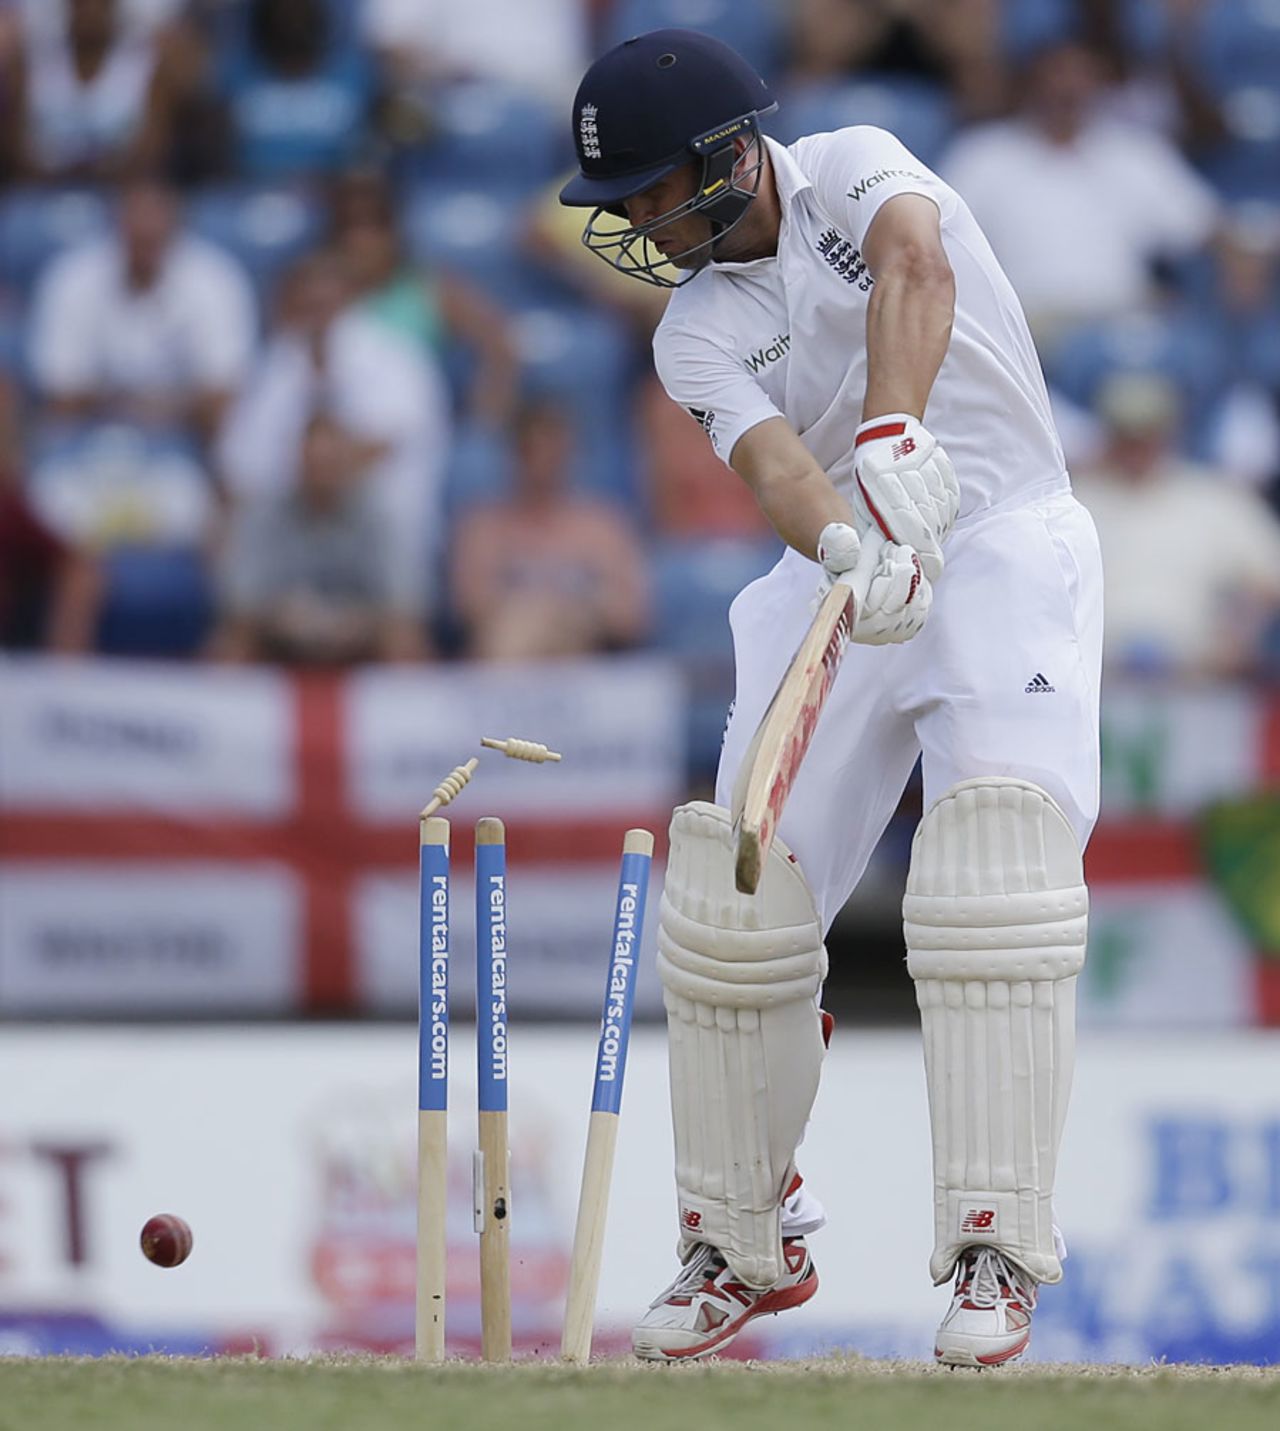 Jonathan Trott dragged on for a duck, West Indies v England, 2nd Test, St George's, 5th day, April 25, 2015